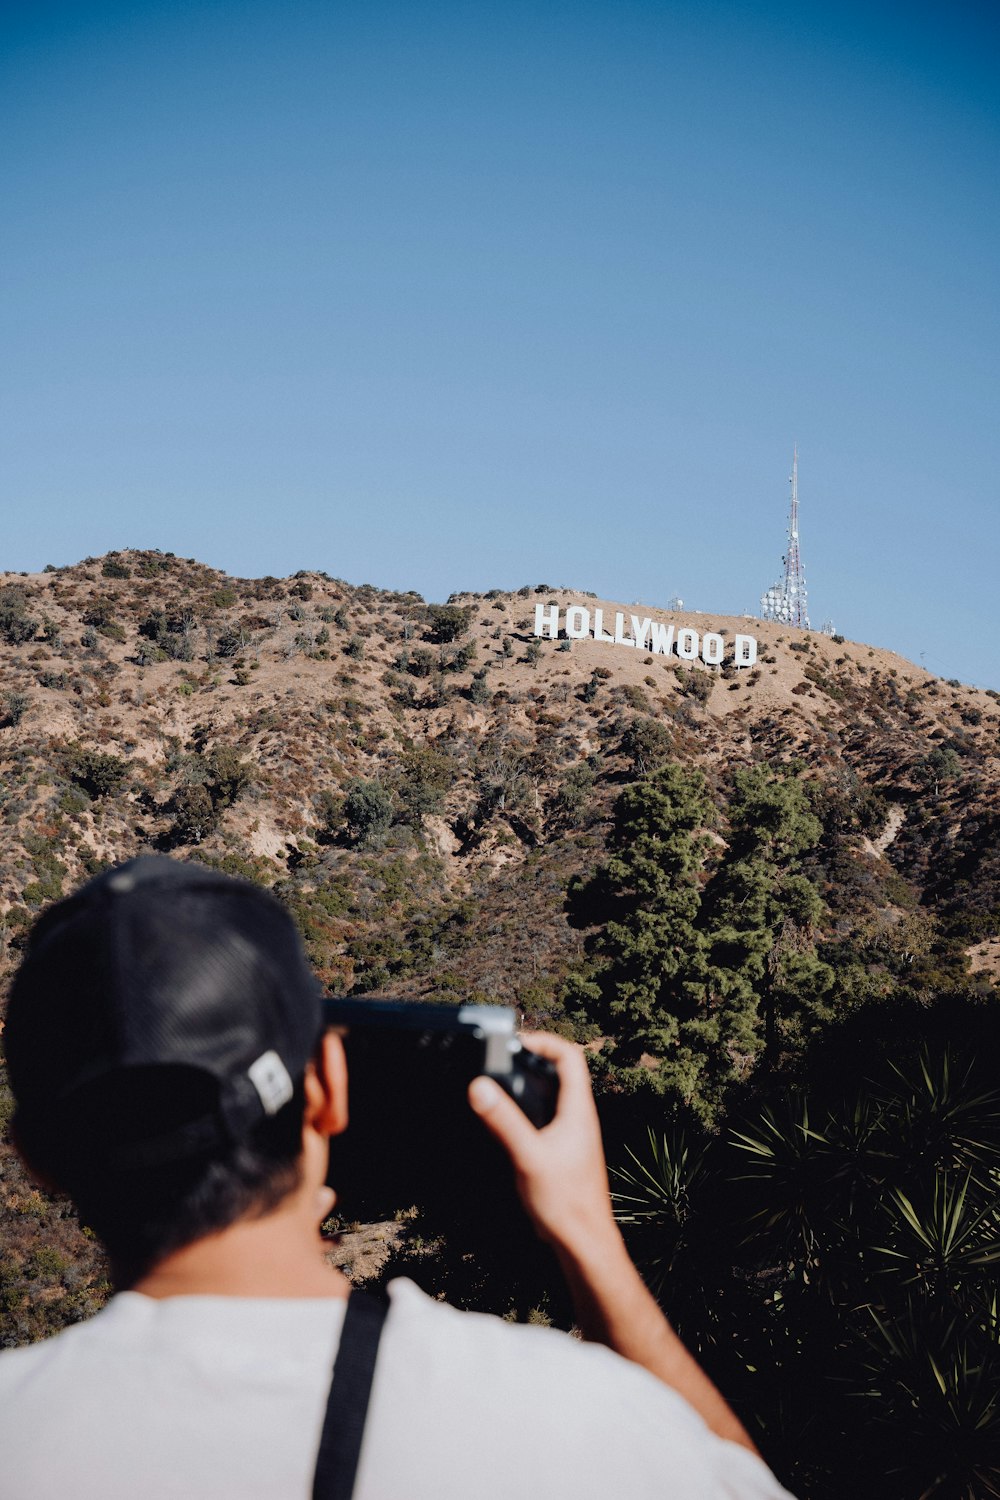 a man taking a picture of the hollywood sign